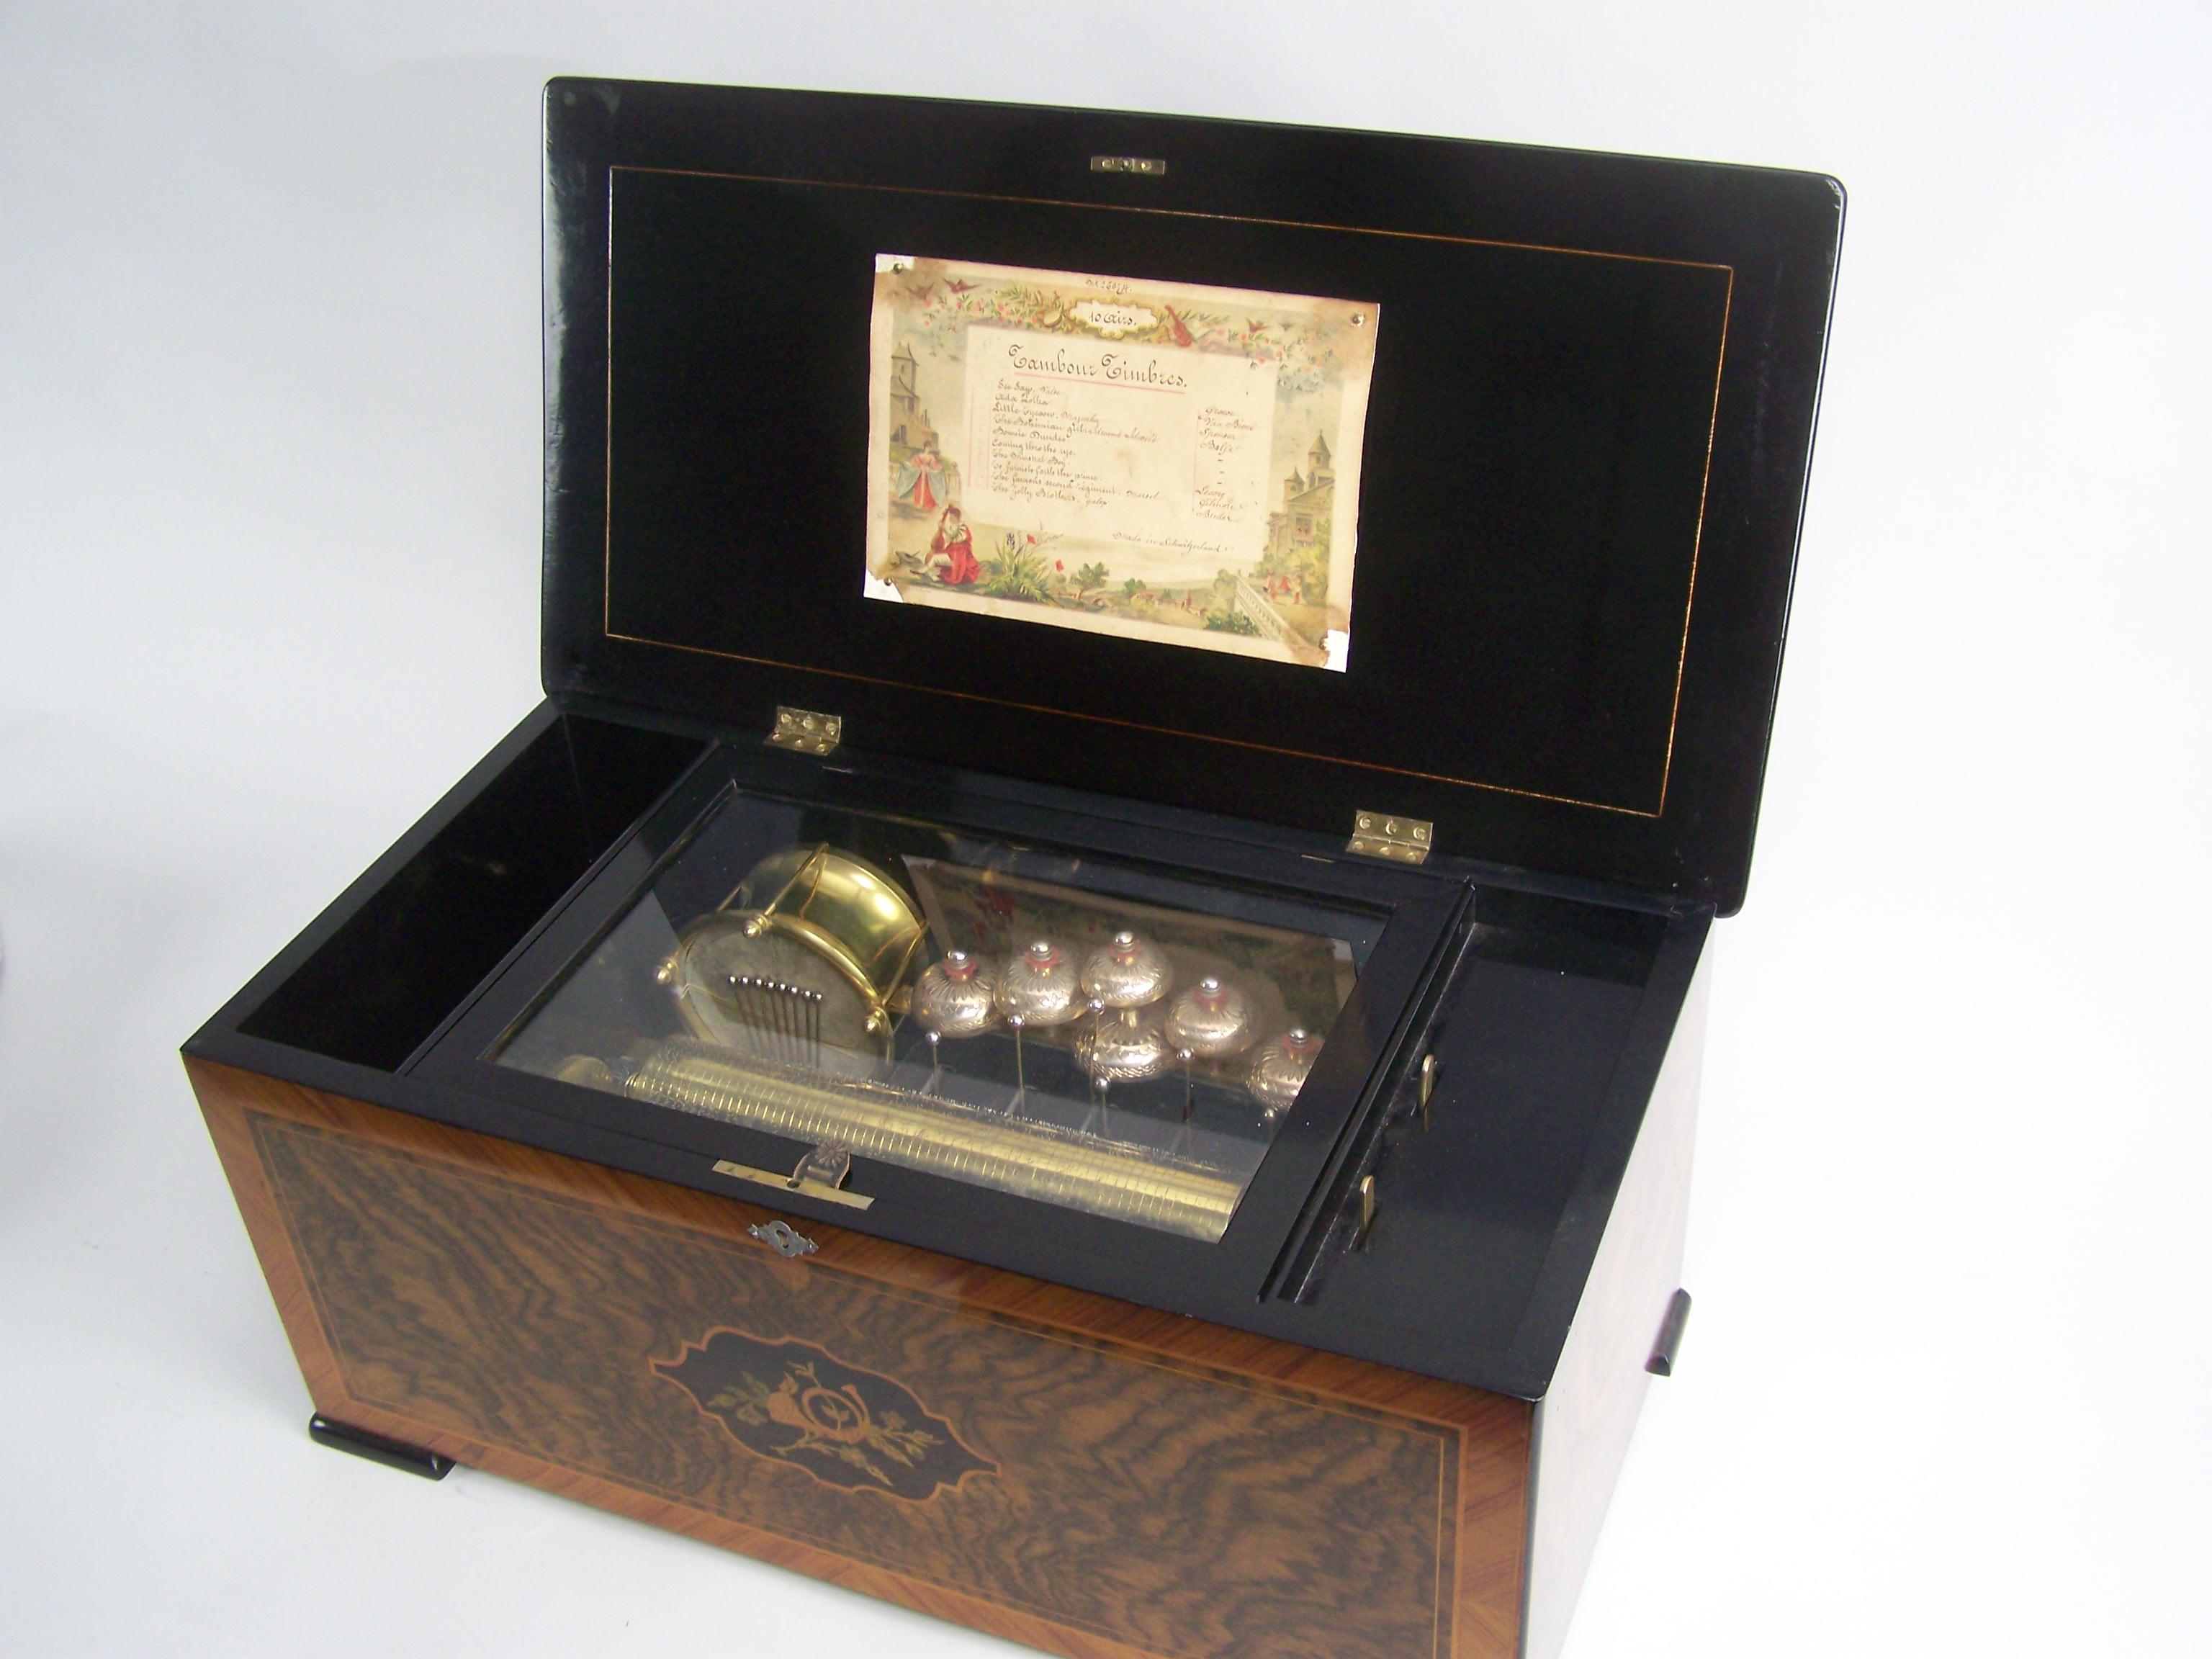 Exposed drum and bells music box.
Playing 10 tunes as indicated on the original tunesheet. 
The inlay to the front and lid is polished, the inside iof the case is black polished. The mechanism has a 28cm cylinder and play very vivid and joyfull